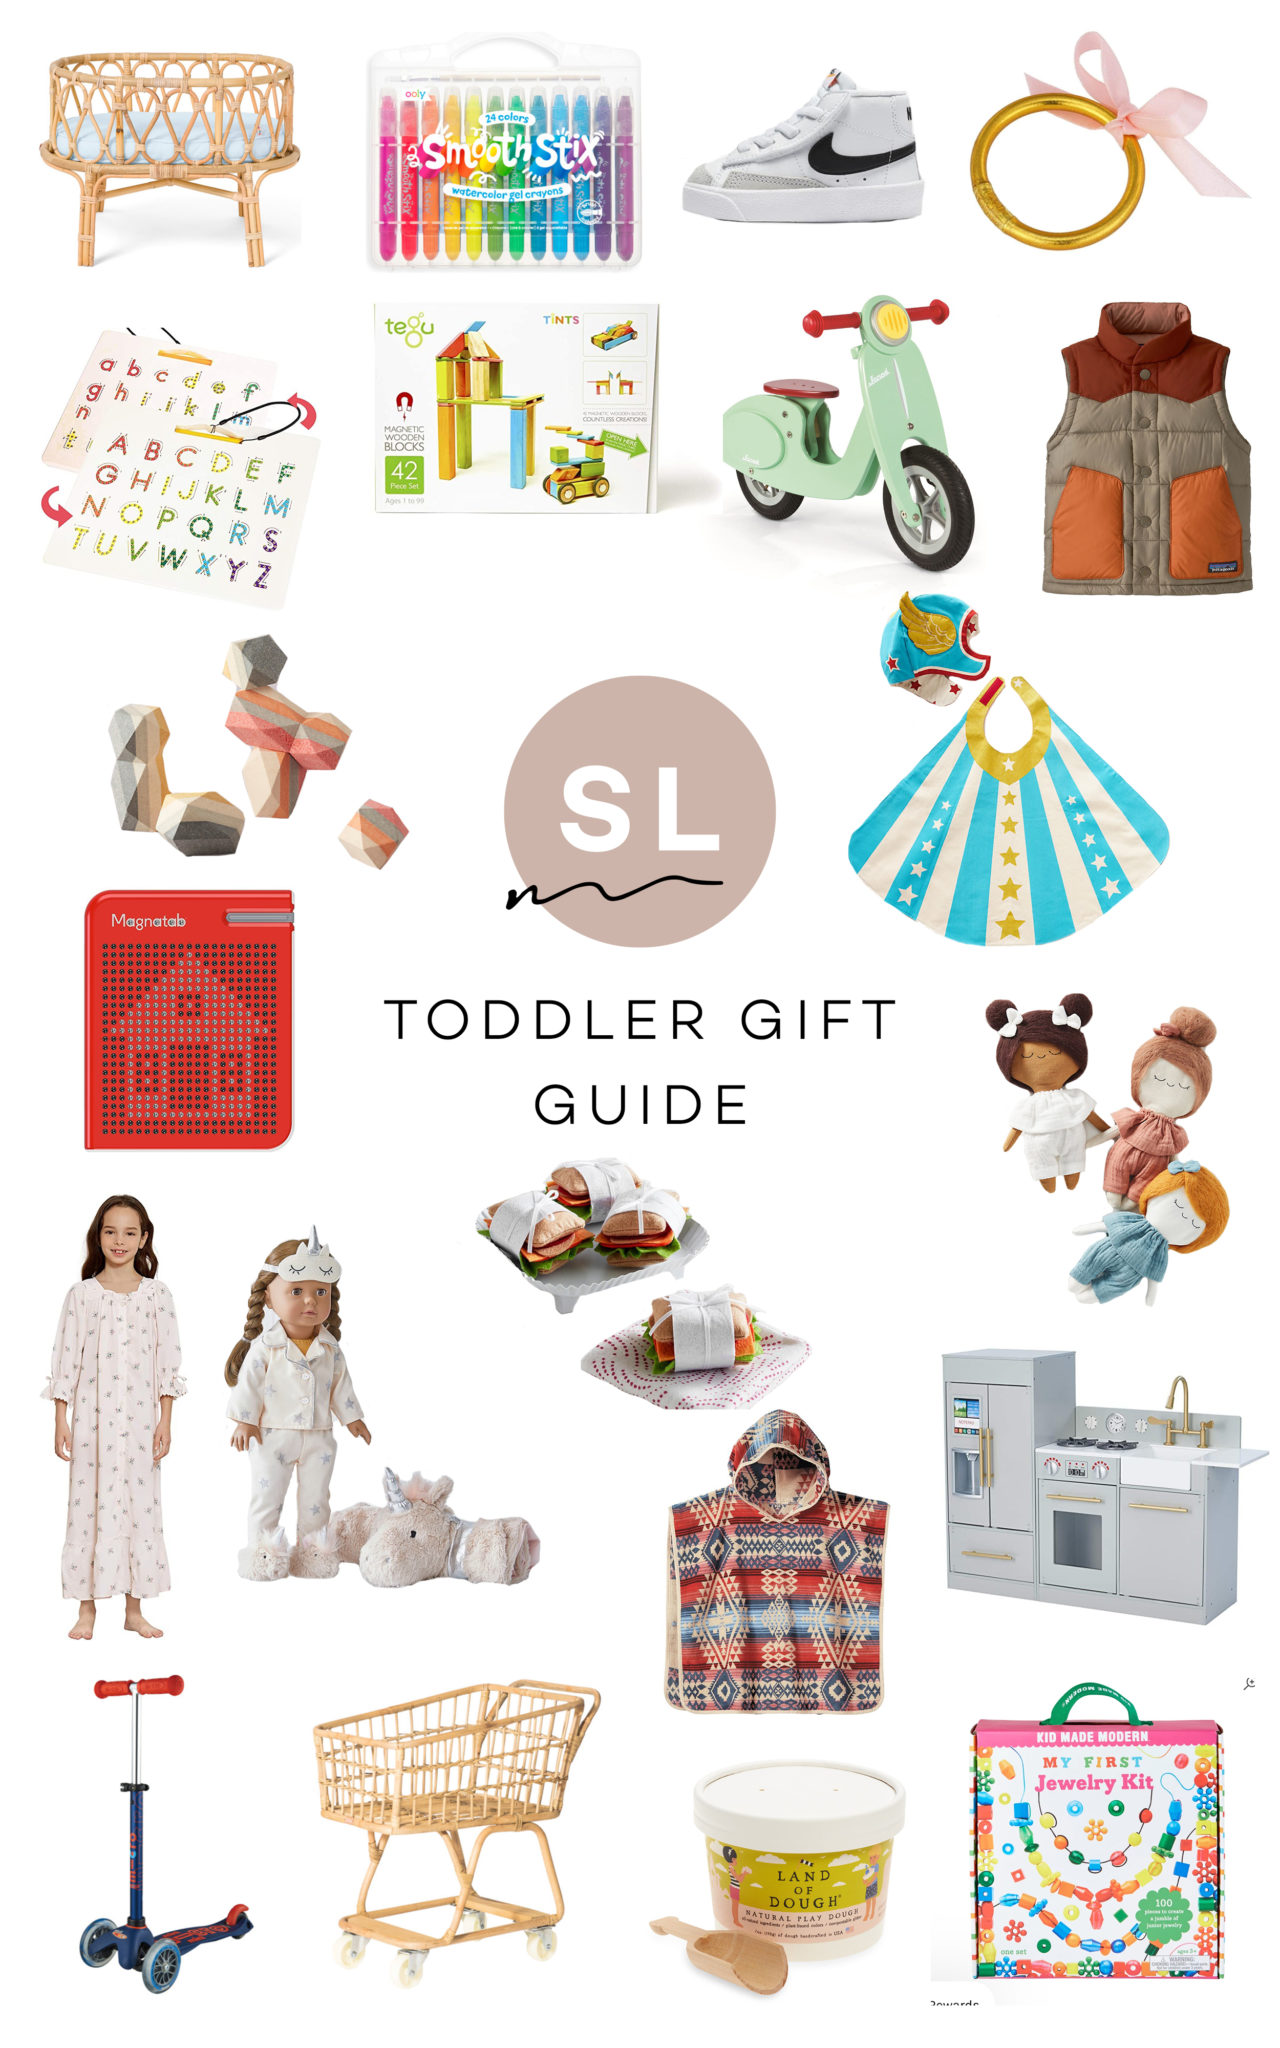 The Best Holiday Gift Guide for Kids and Toddlers